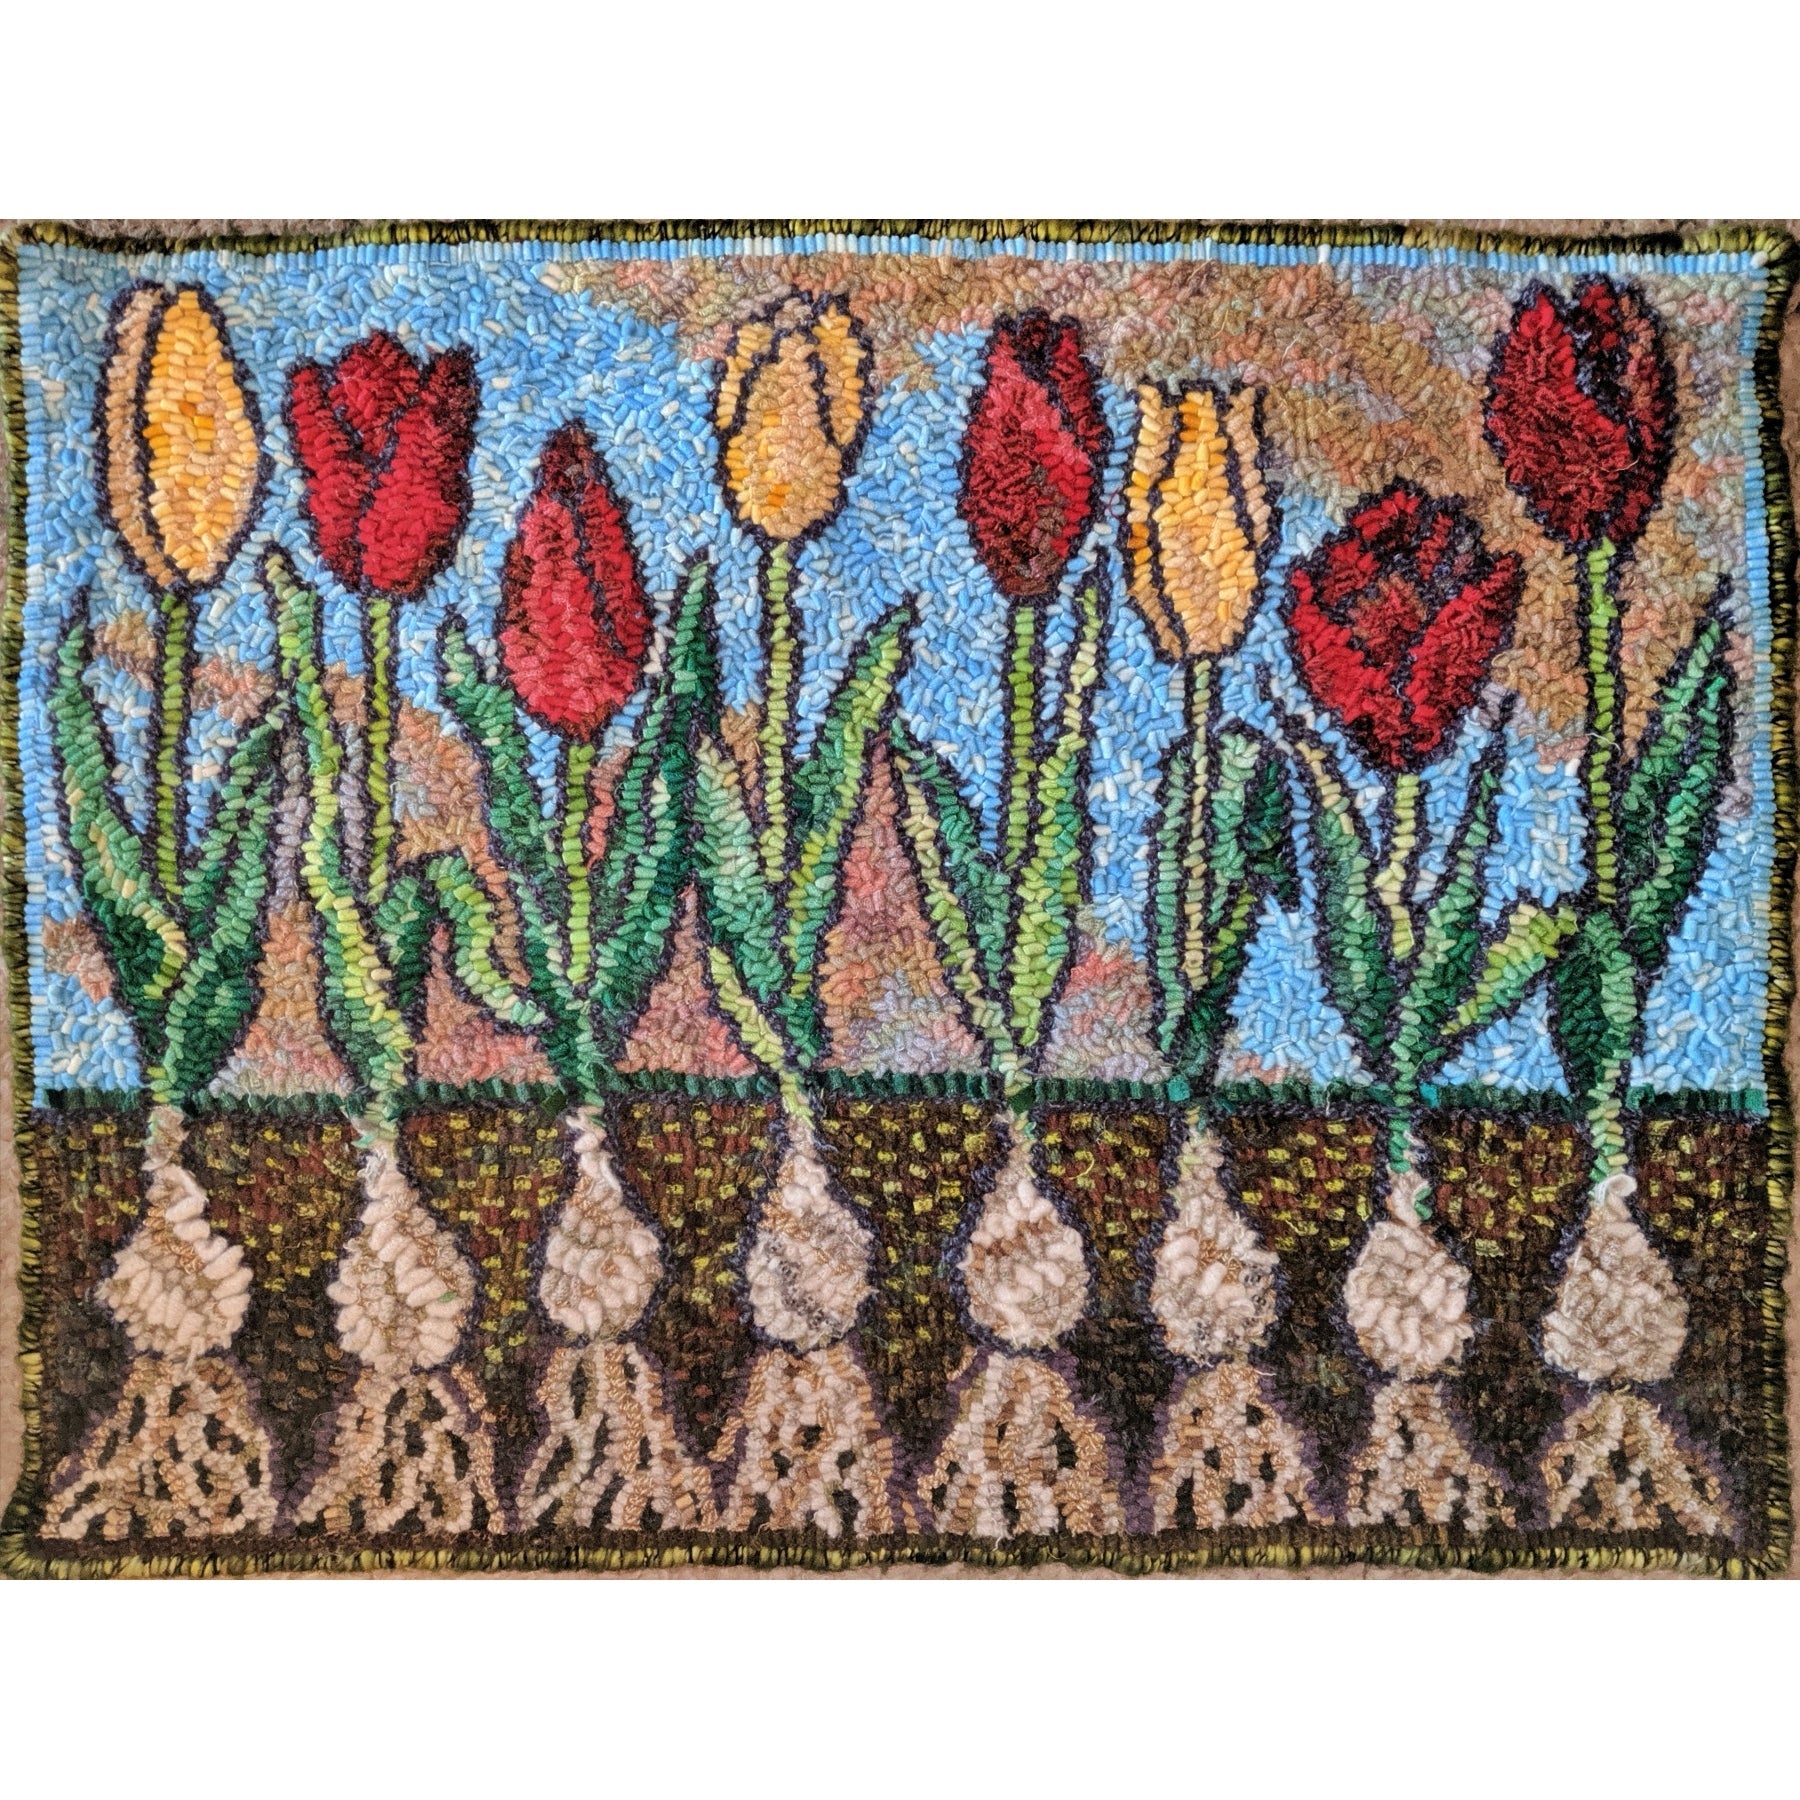 Renewal, rug hooked by Mary Gordon